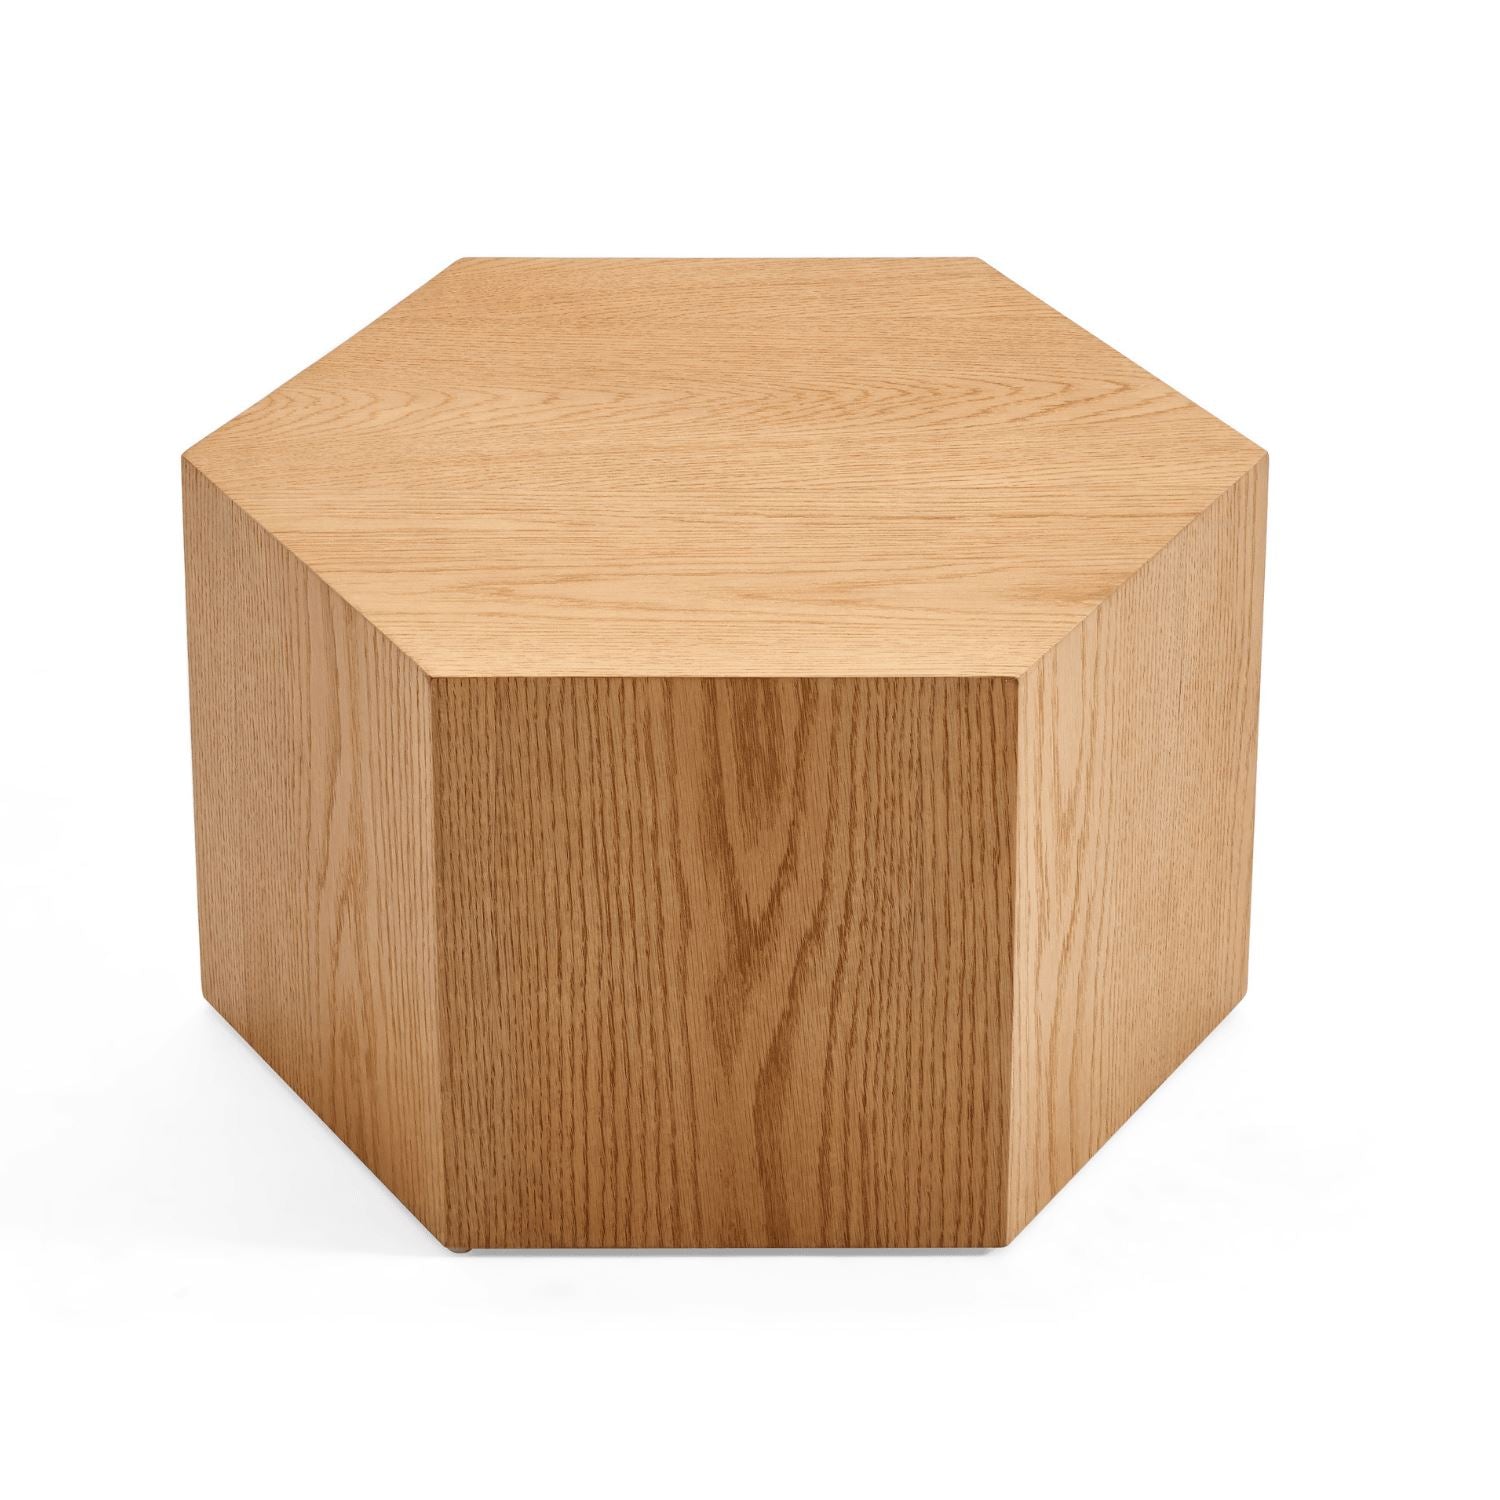 Valsun Side Table - Valyou 